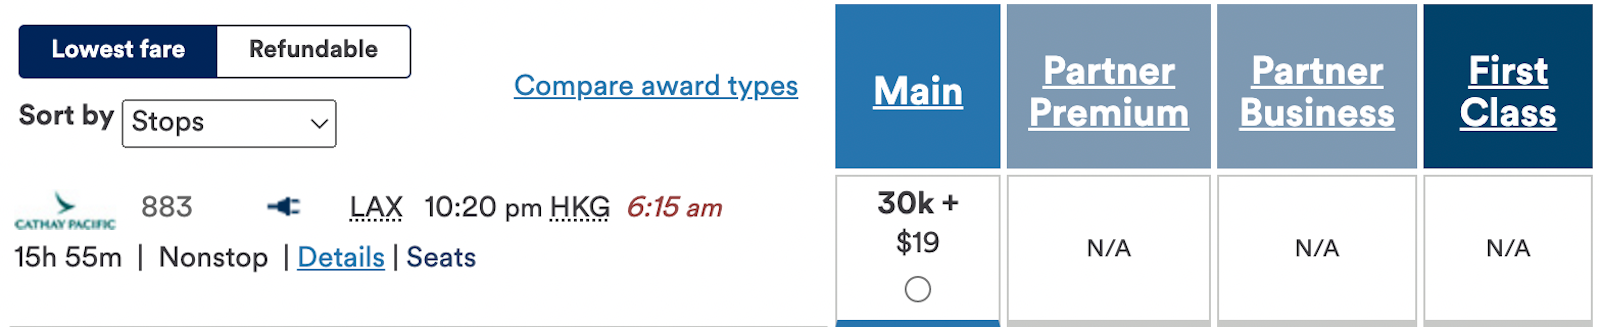 award pricing for flights with Alaska Airlines miles